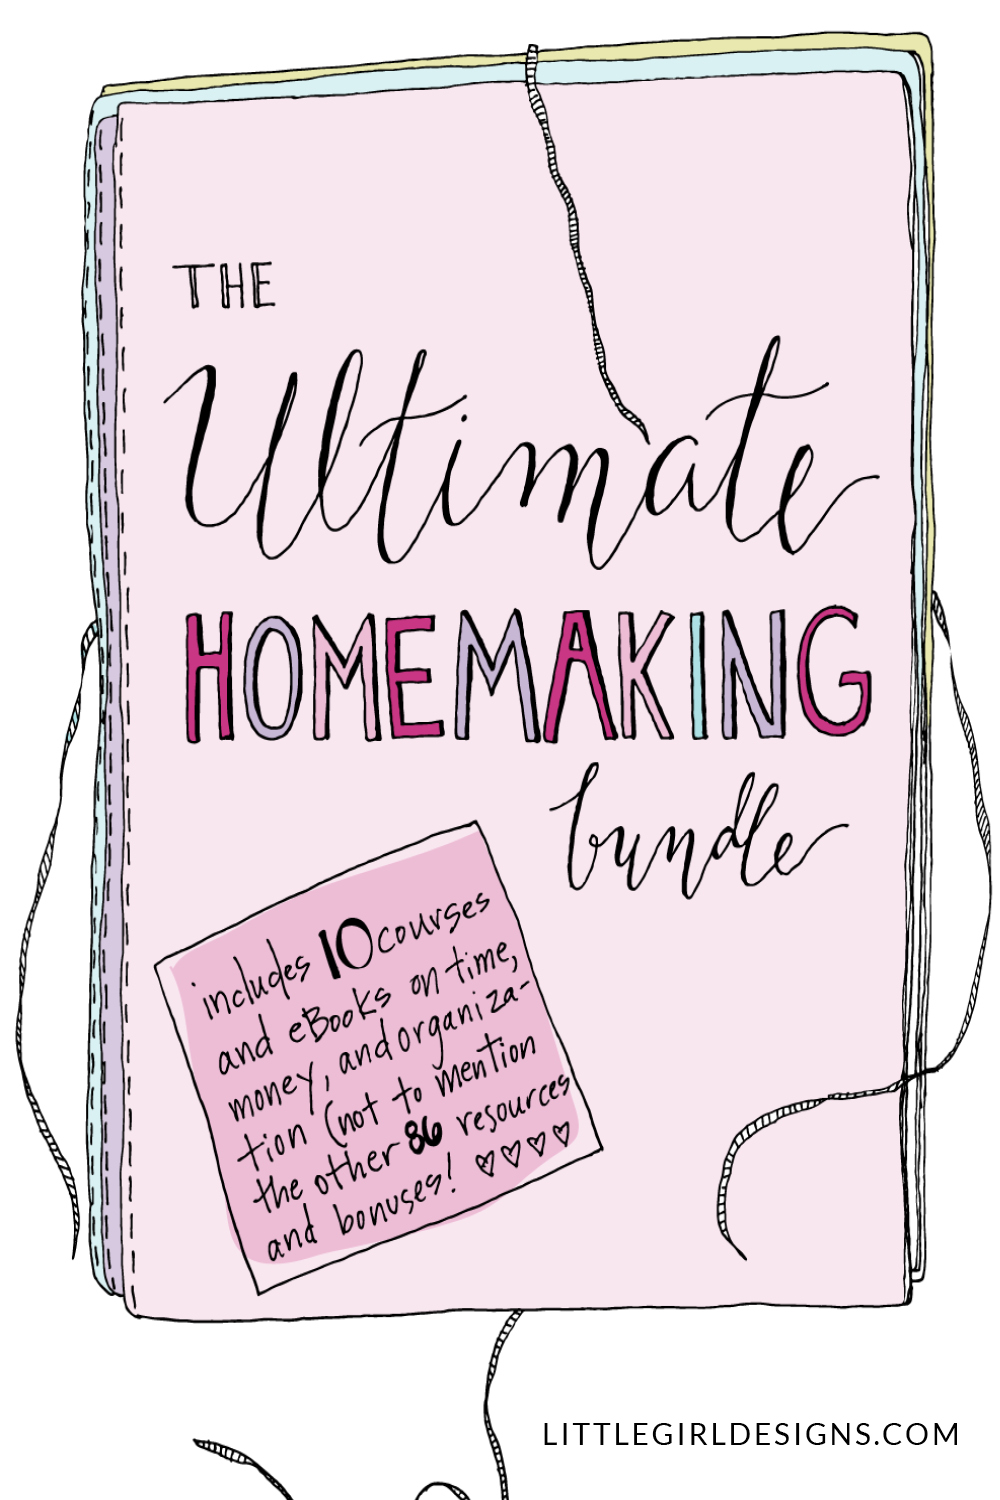 The Ultimate Homemaking Bundle: Time, Money, and Organization Resources